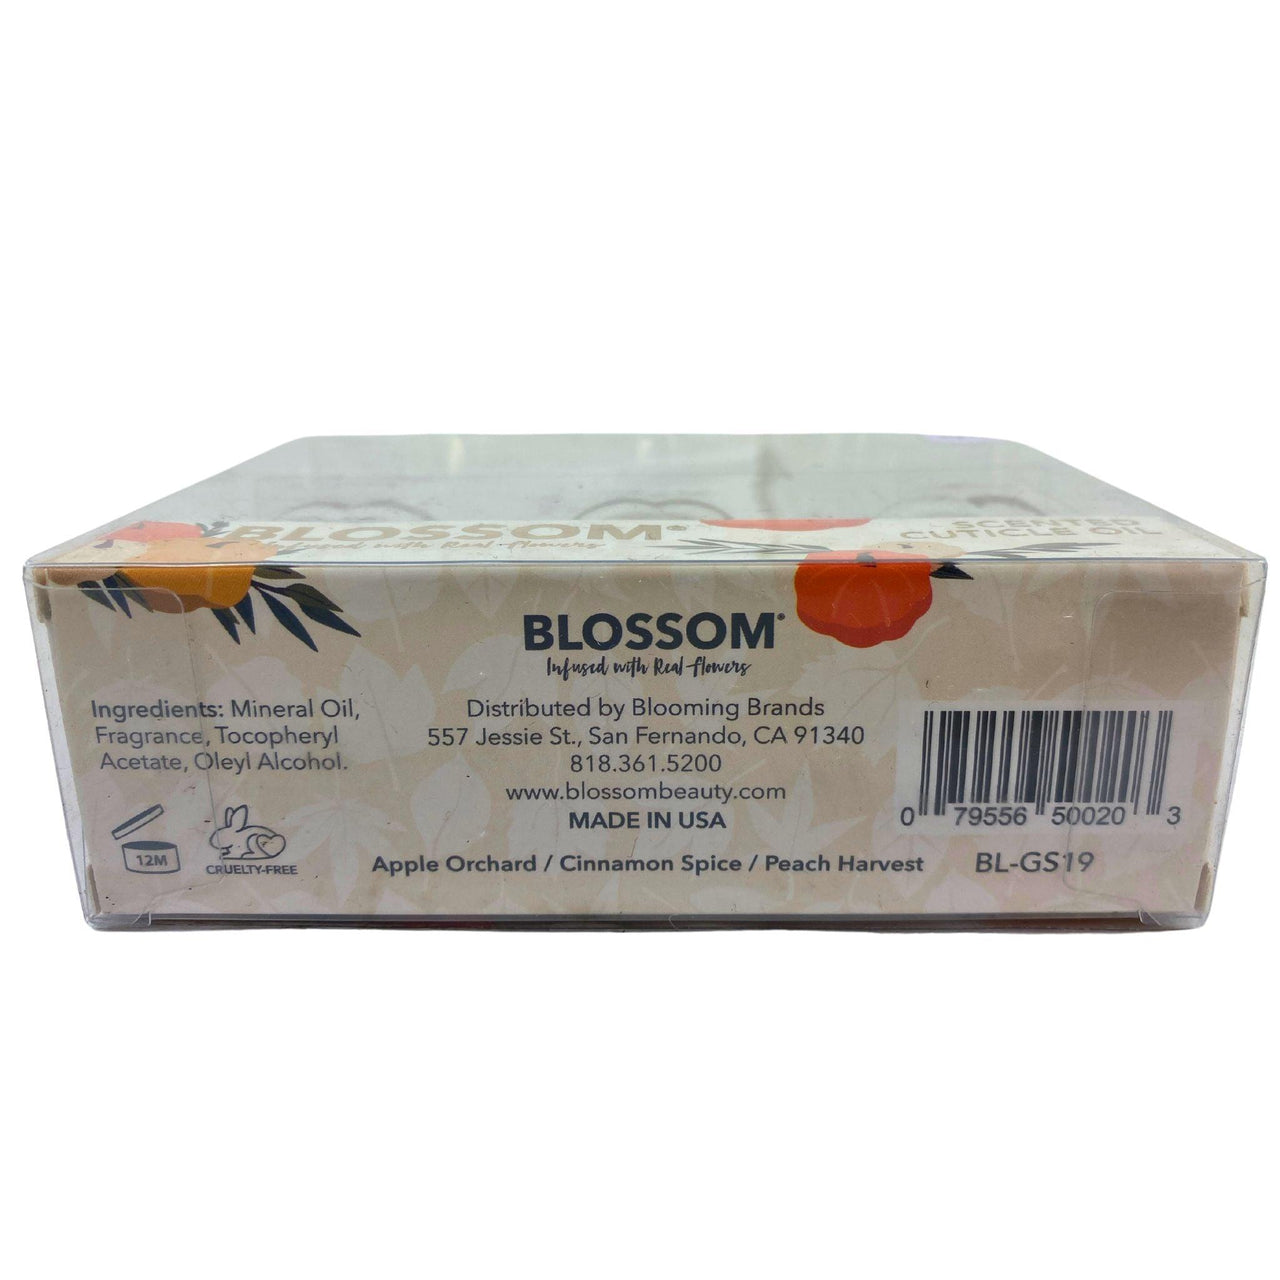 Blossom Infused with Real Flowers Scented Cuticle Oil (50 pcs lot) - Discount Wholesalers Inc